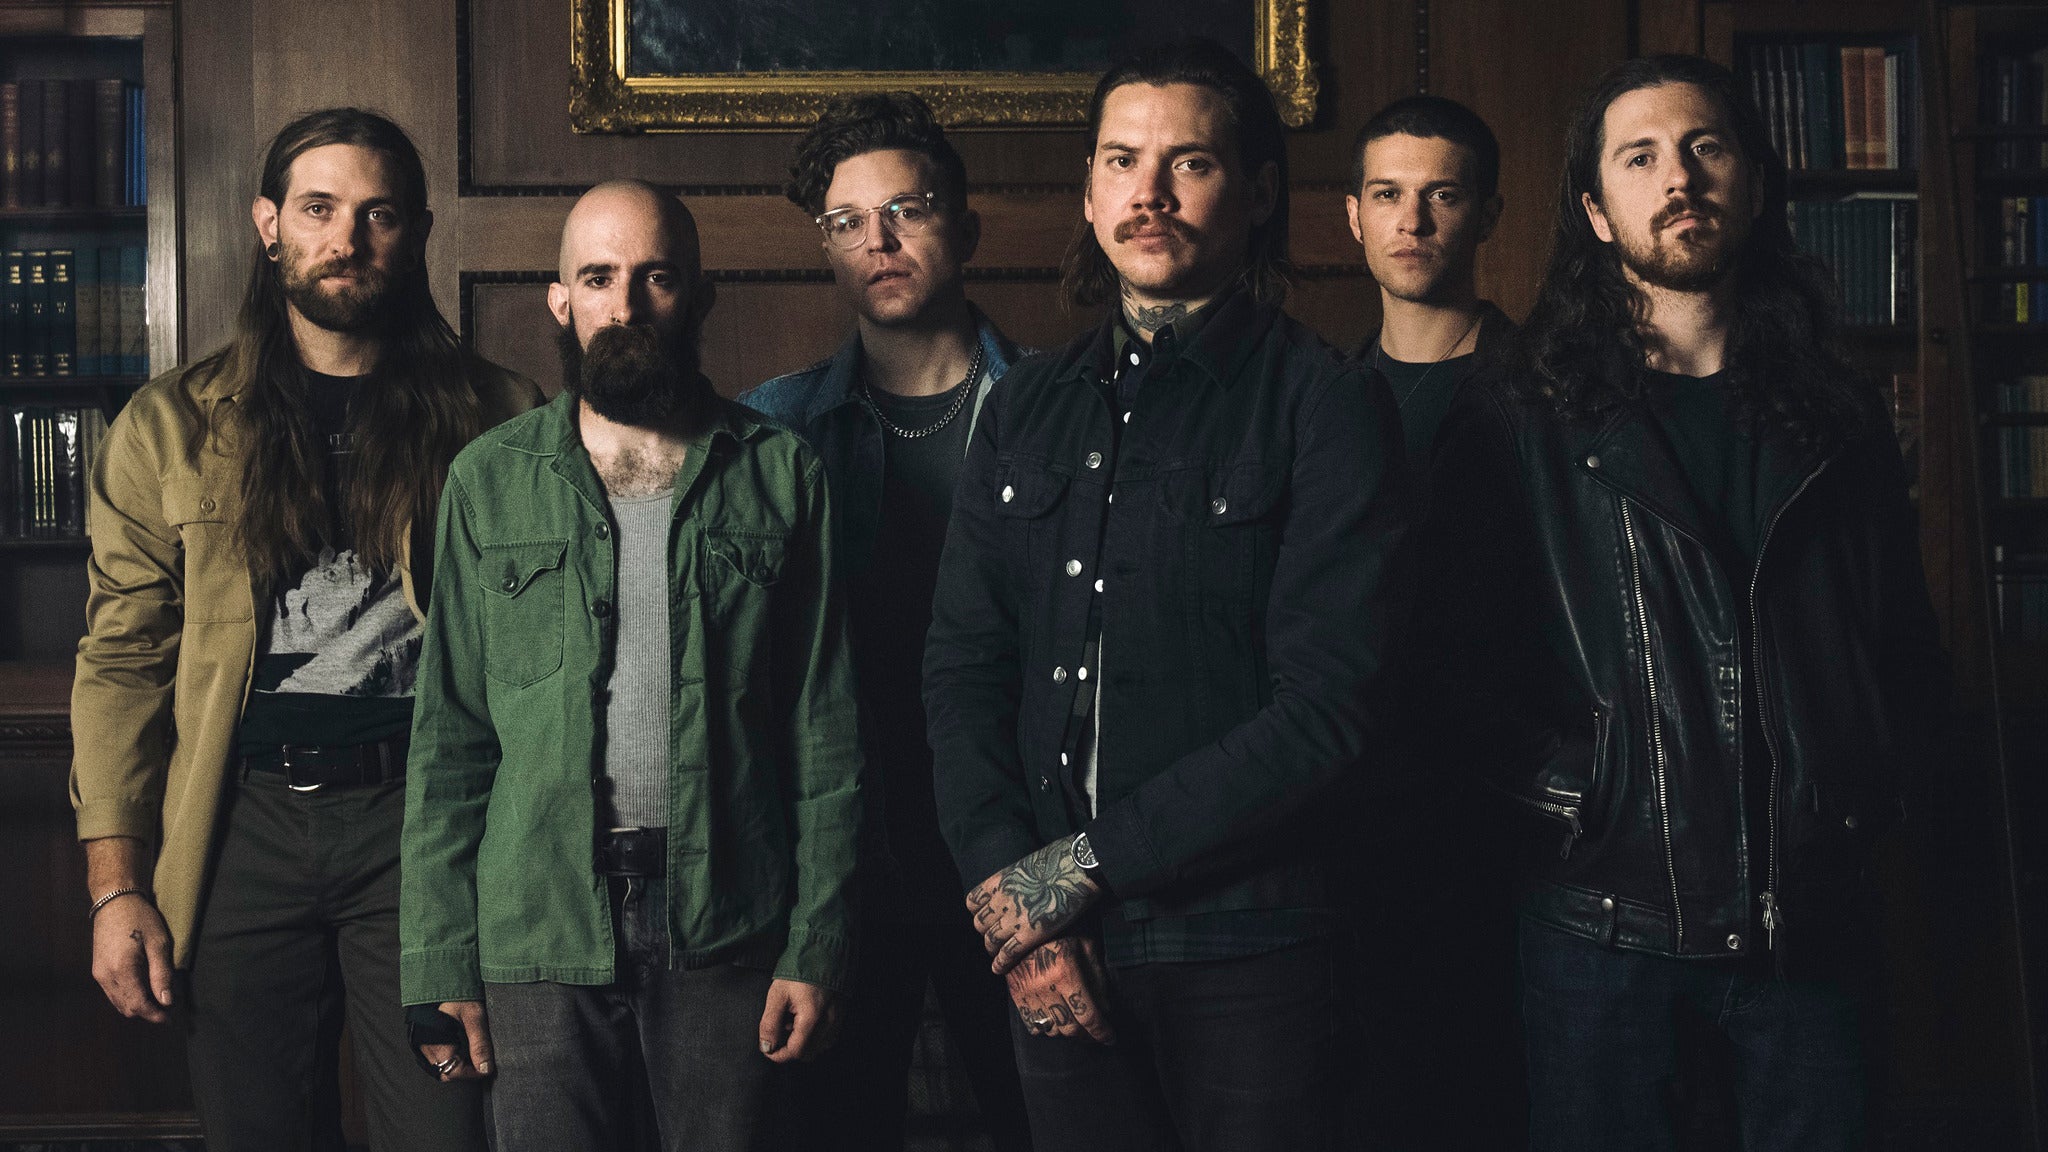 members only presale password for The Devil Wears Prada & Fit For A King: METALCORE DROPOUTS advanced tickets in Toronto